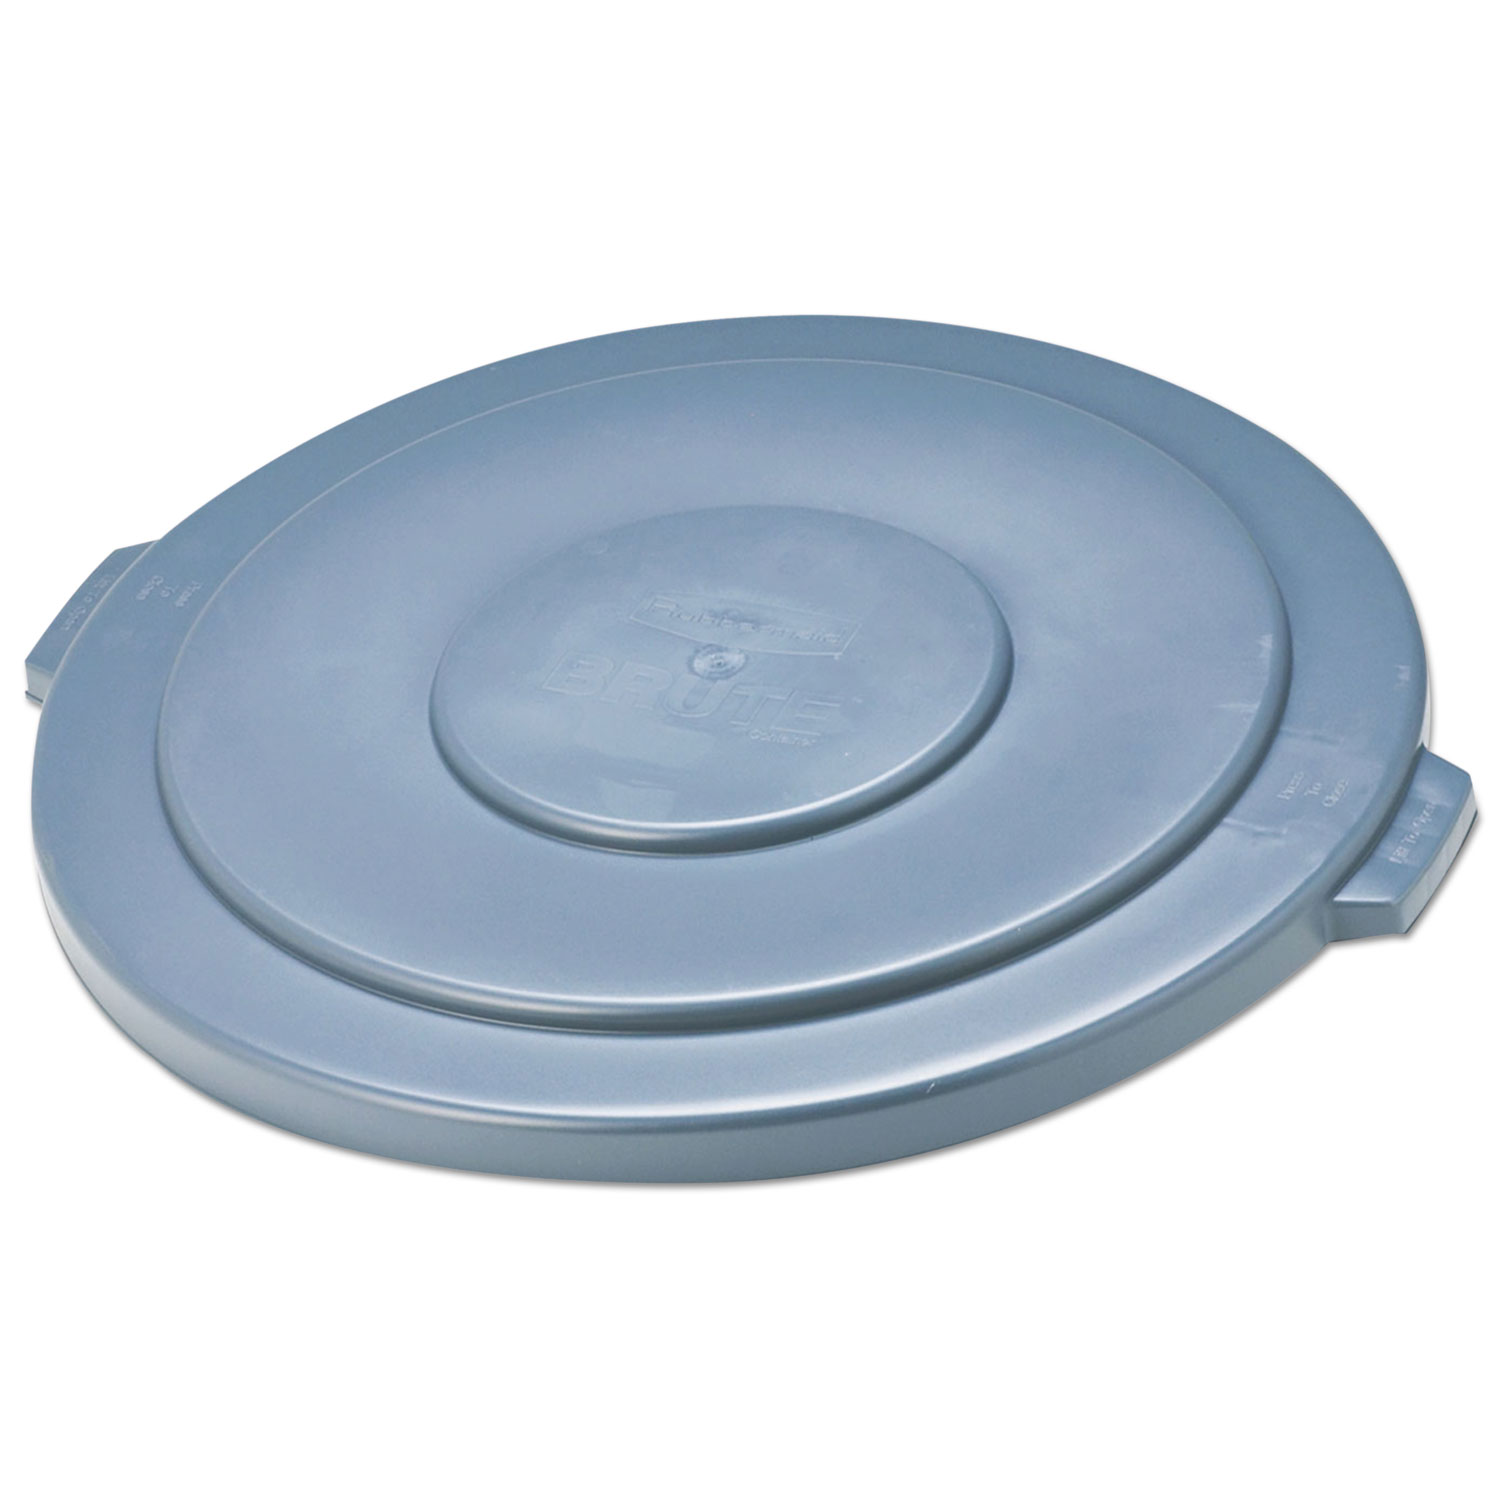 Round Flat Top Lid, for 55-Gallon Round Brute Containers, 26 3/4, dia., Gray